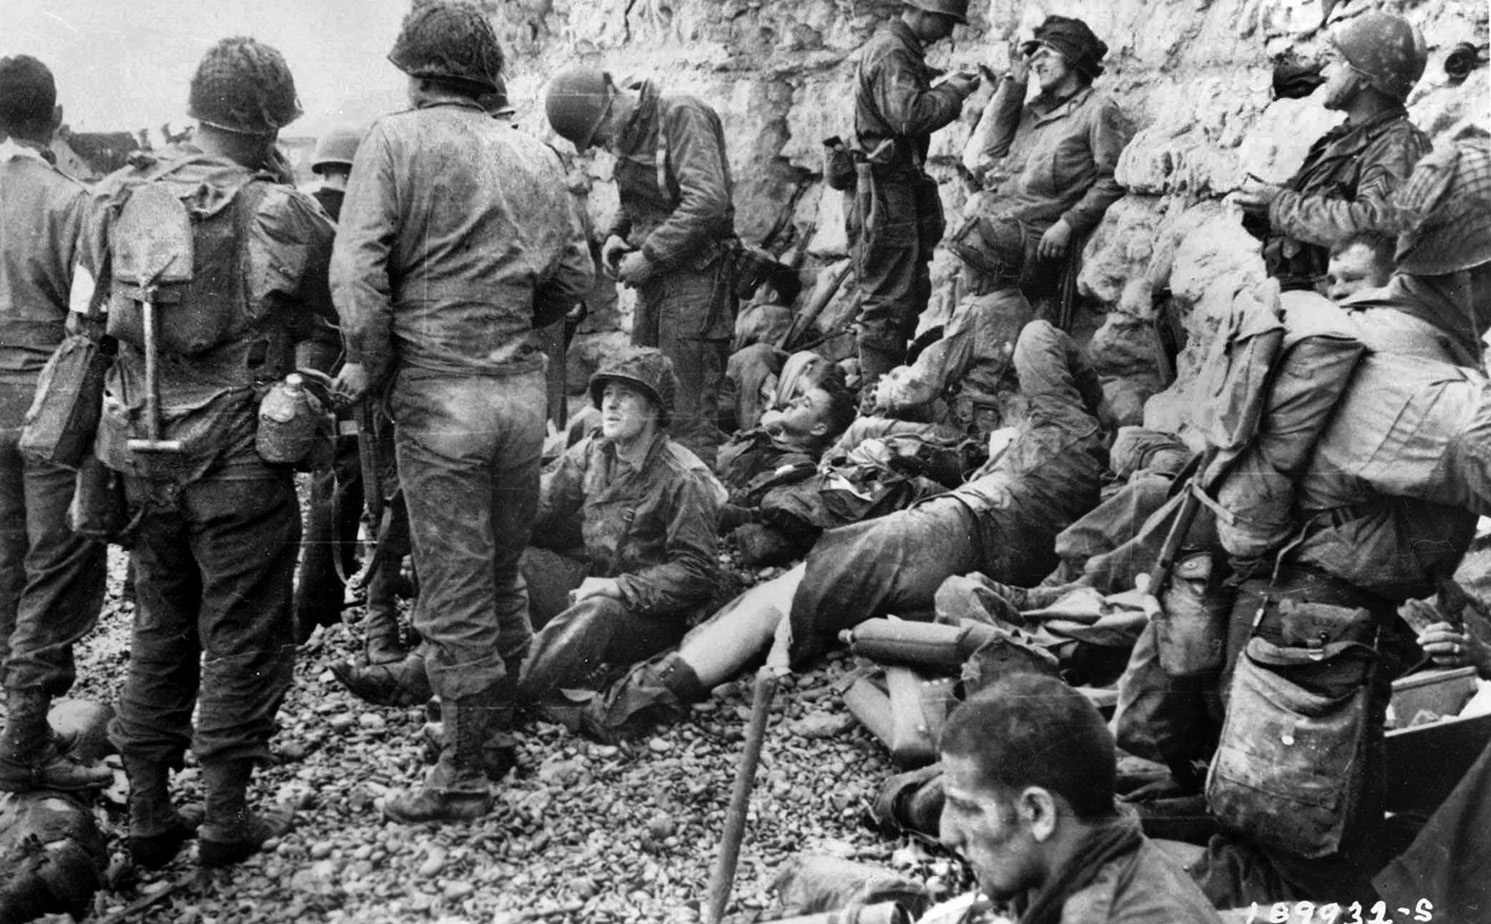 Having just survived the hellish boat ride into shore, a group of wounded 1st Division soldiers take shelter along a cliff face at Colleville-sur-Mer to await evacuation to a hospital ship. 